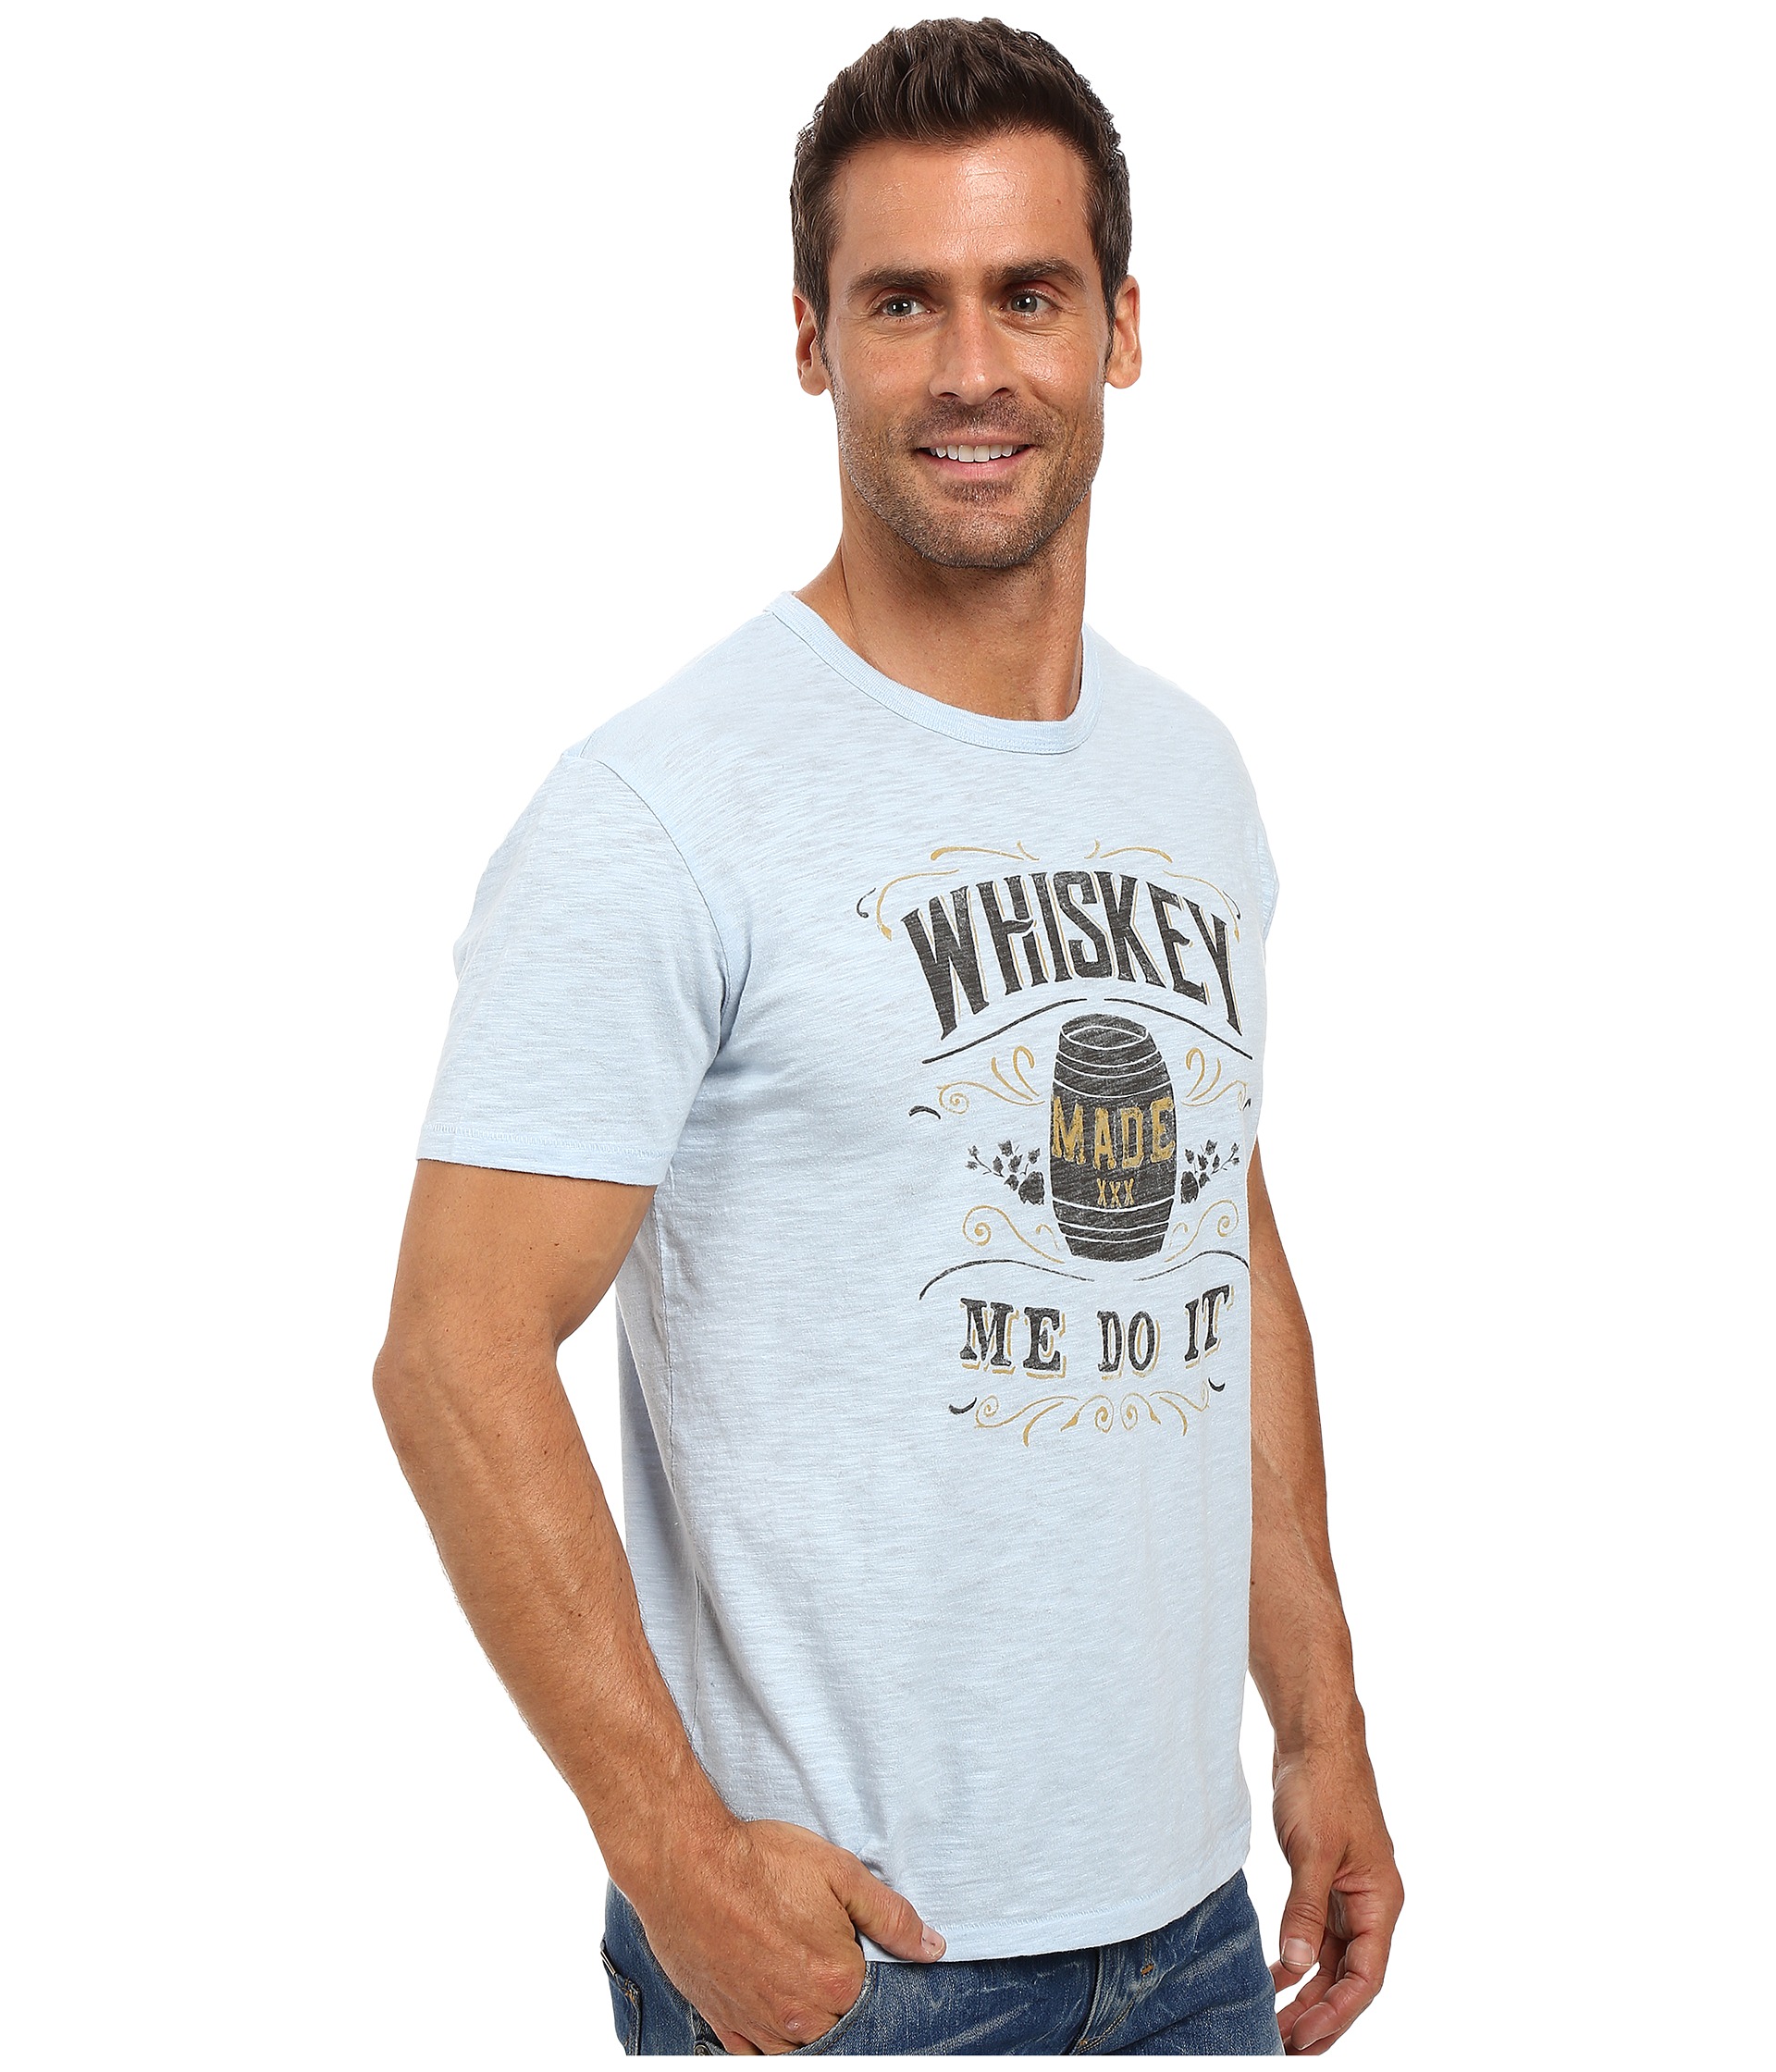 Lucky Brand Whiskey Made Me Graphic Tee